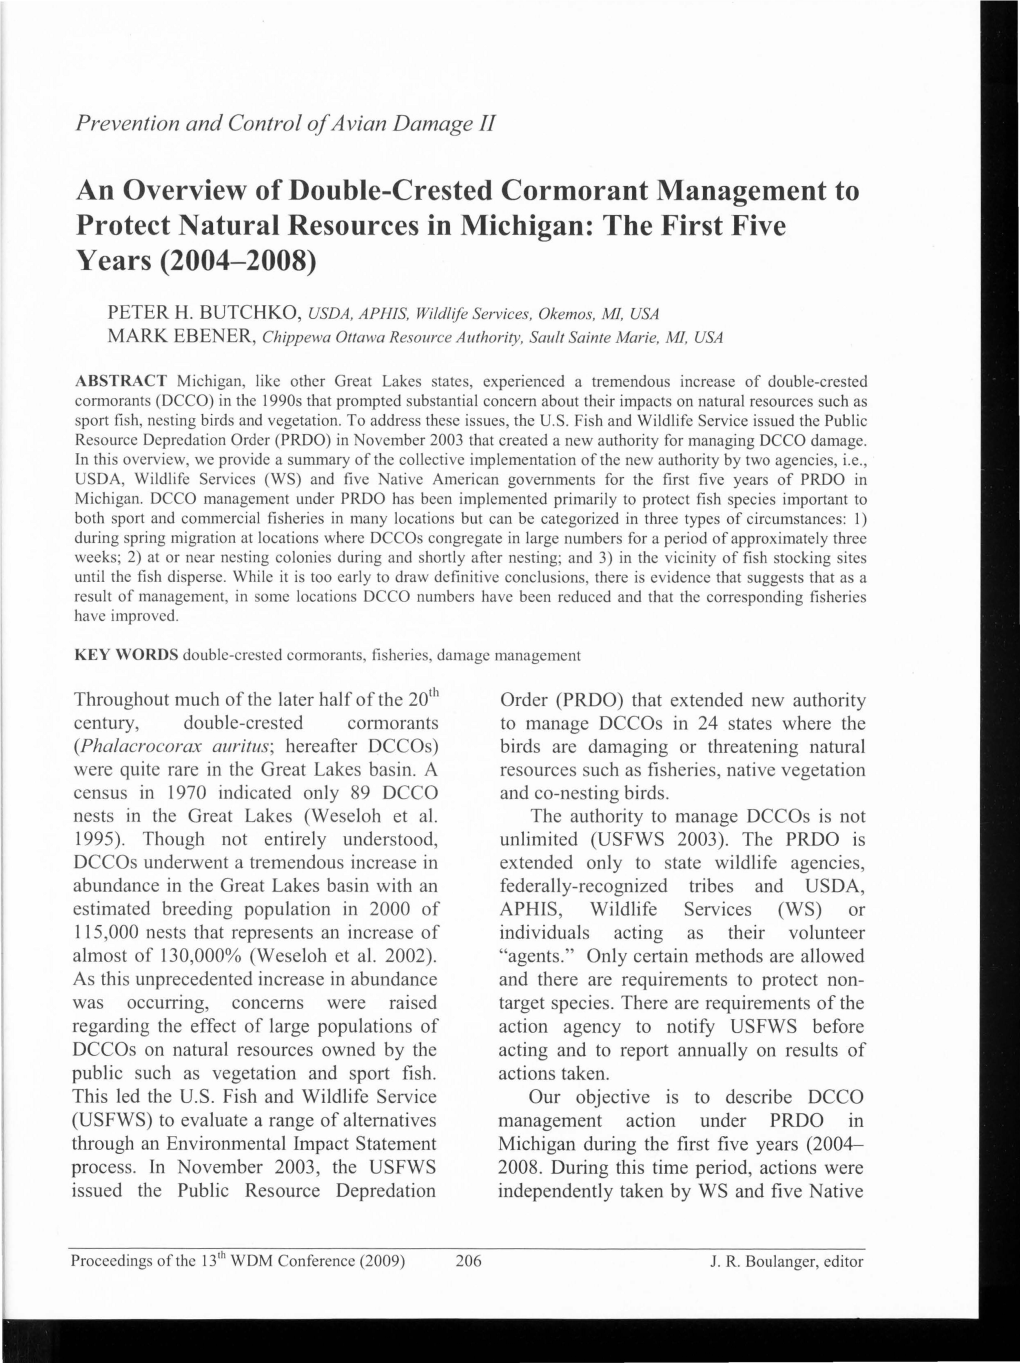 An Overview of Double-Crested Cormorant Management to Protect Natural Resources in Michigan: the First Five Years (2004-2008)